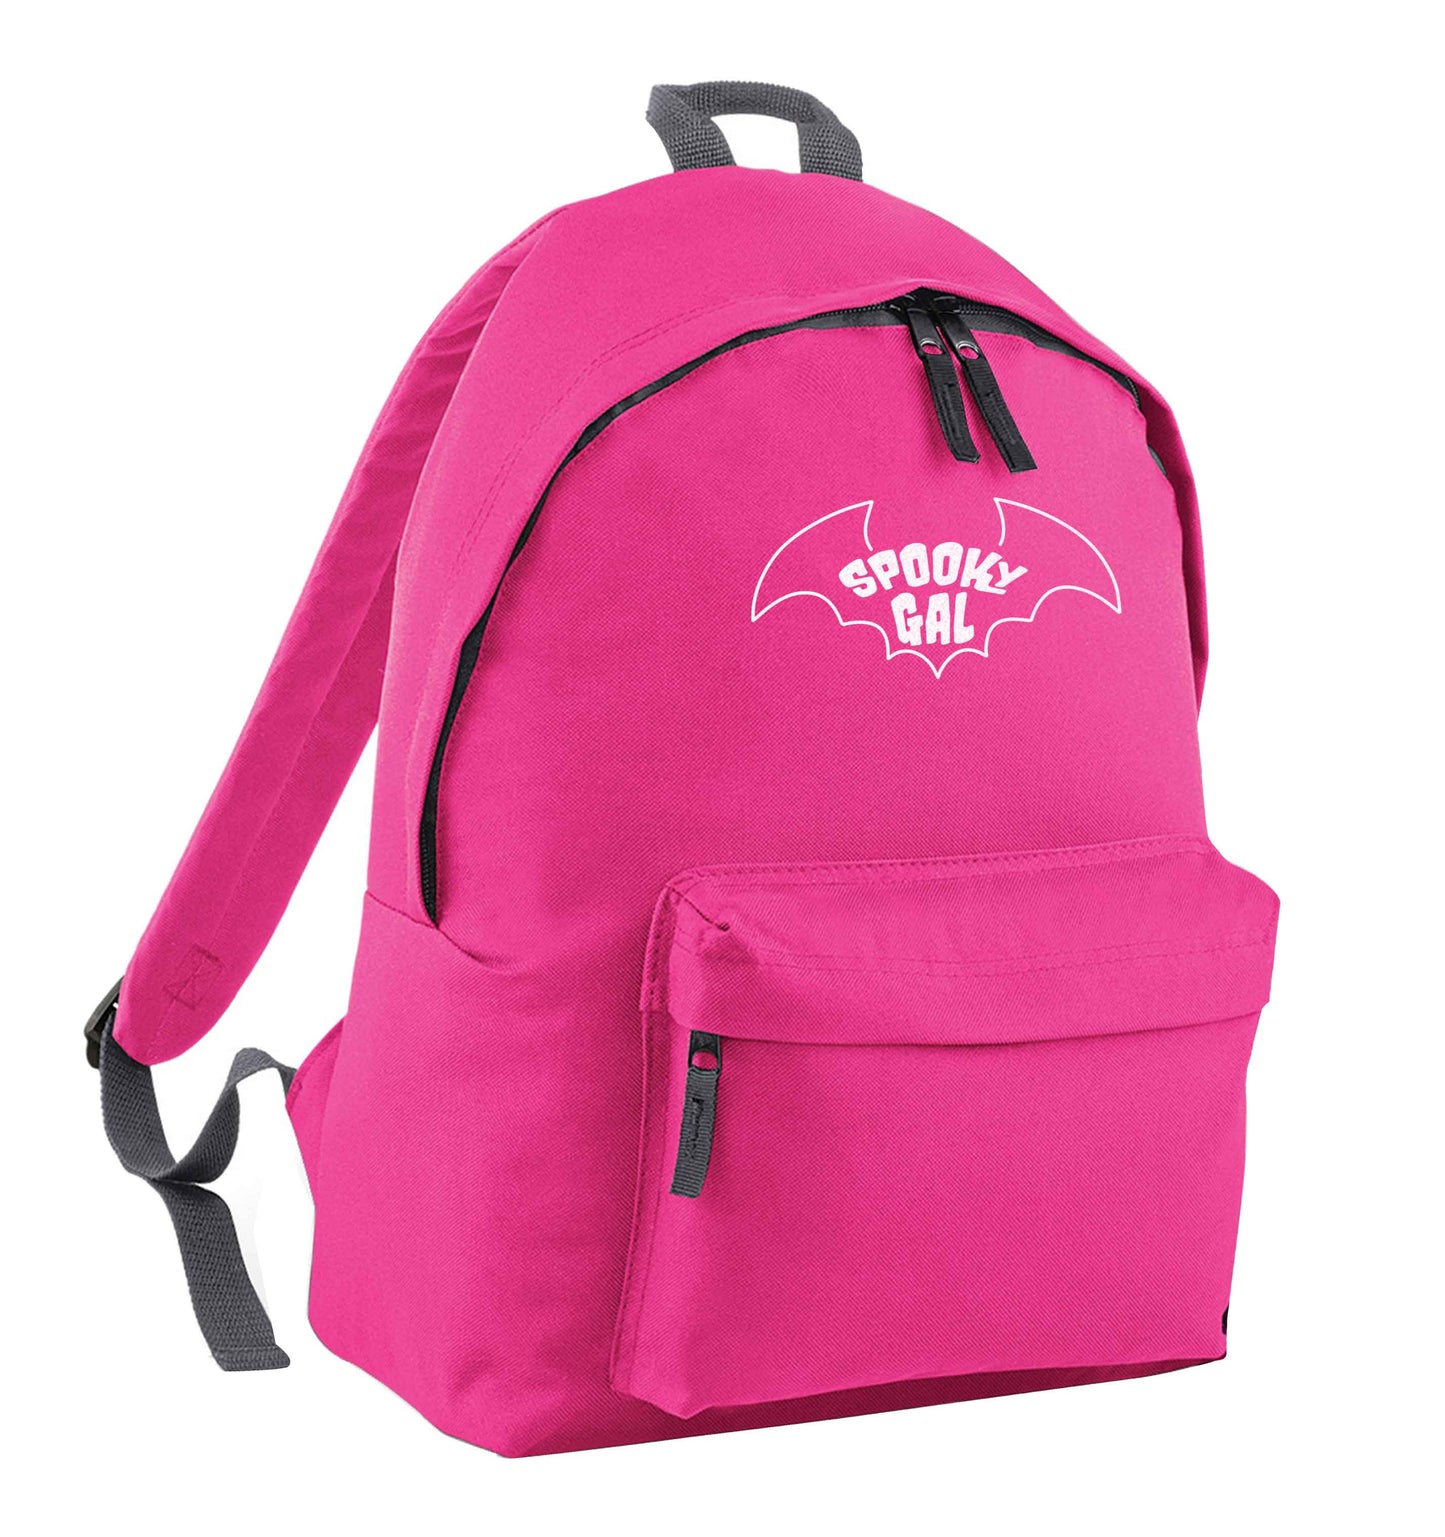 Spooky gal Kit pink children's backpack